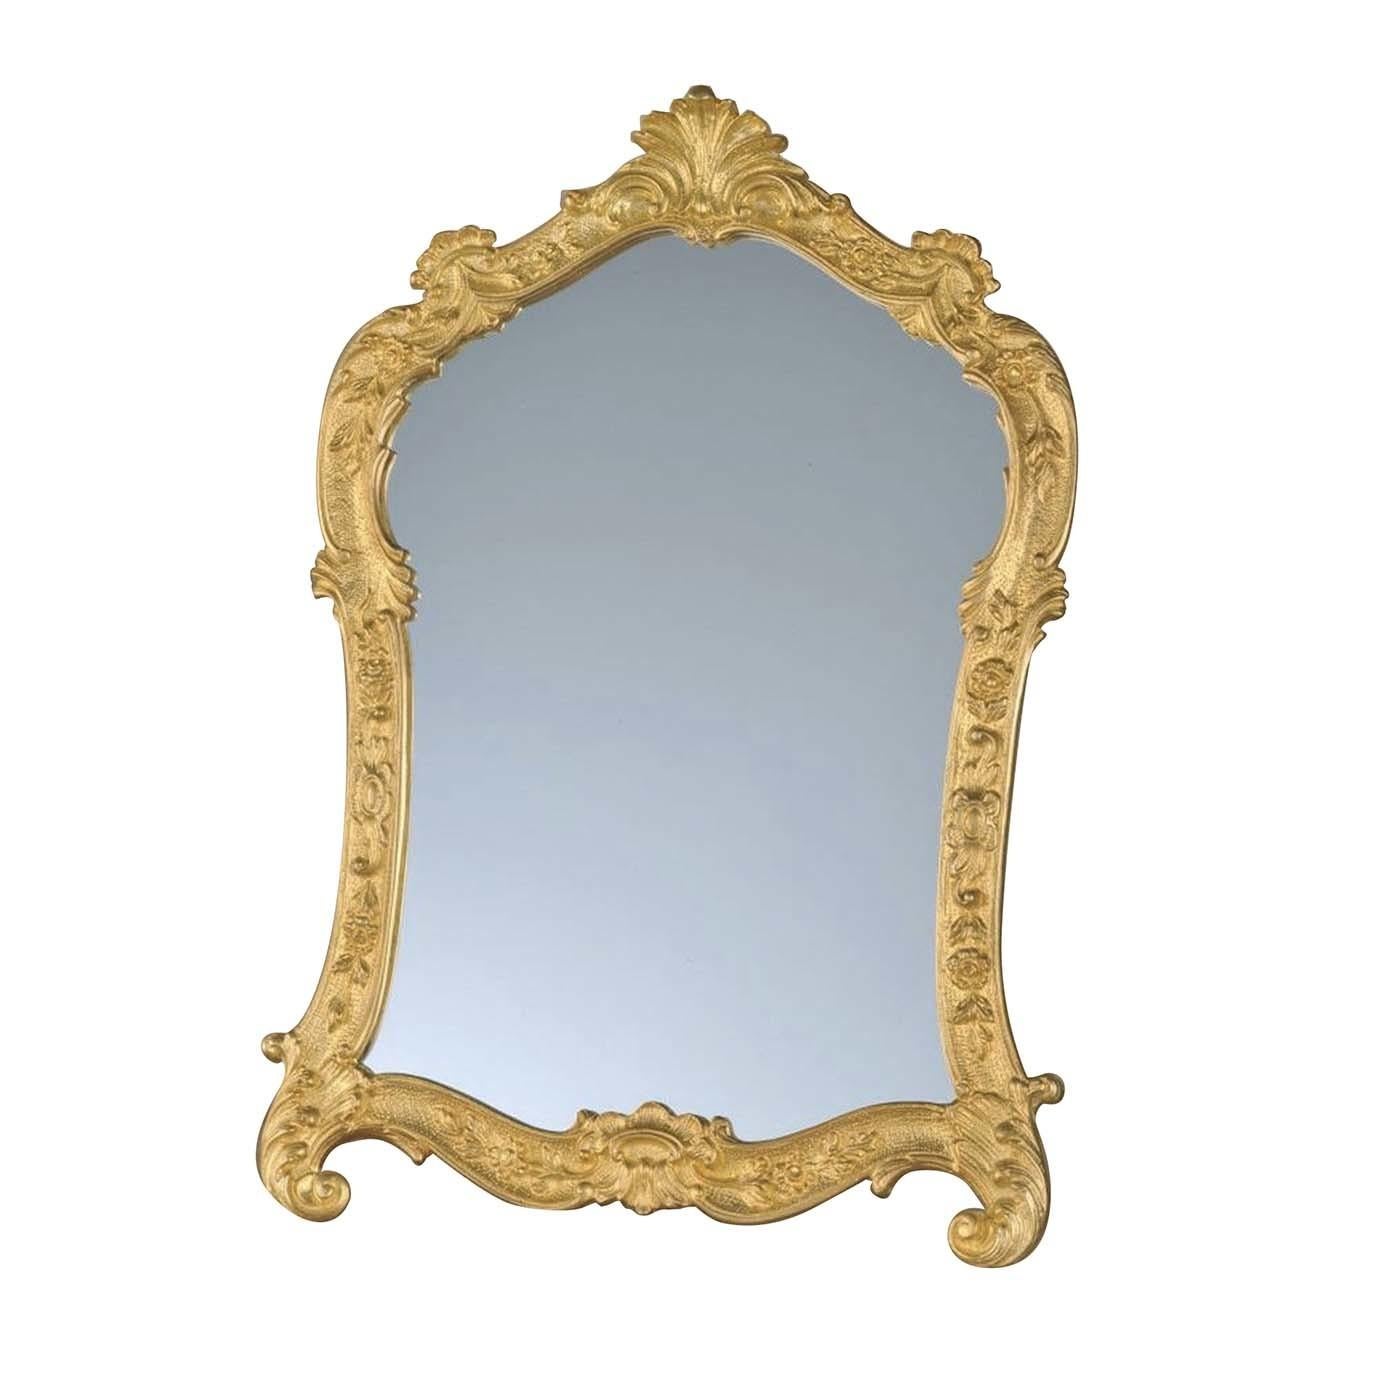 This console mirror will create a magnificent first impression at the entrance of a classically decorated home, or as statement piece in the living room on a side table or mantelpiece. Its elegant Silhouette features a bronze frame with a satin gold